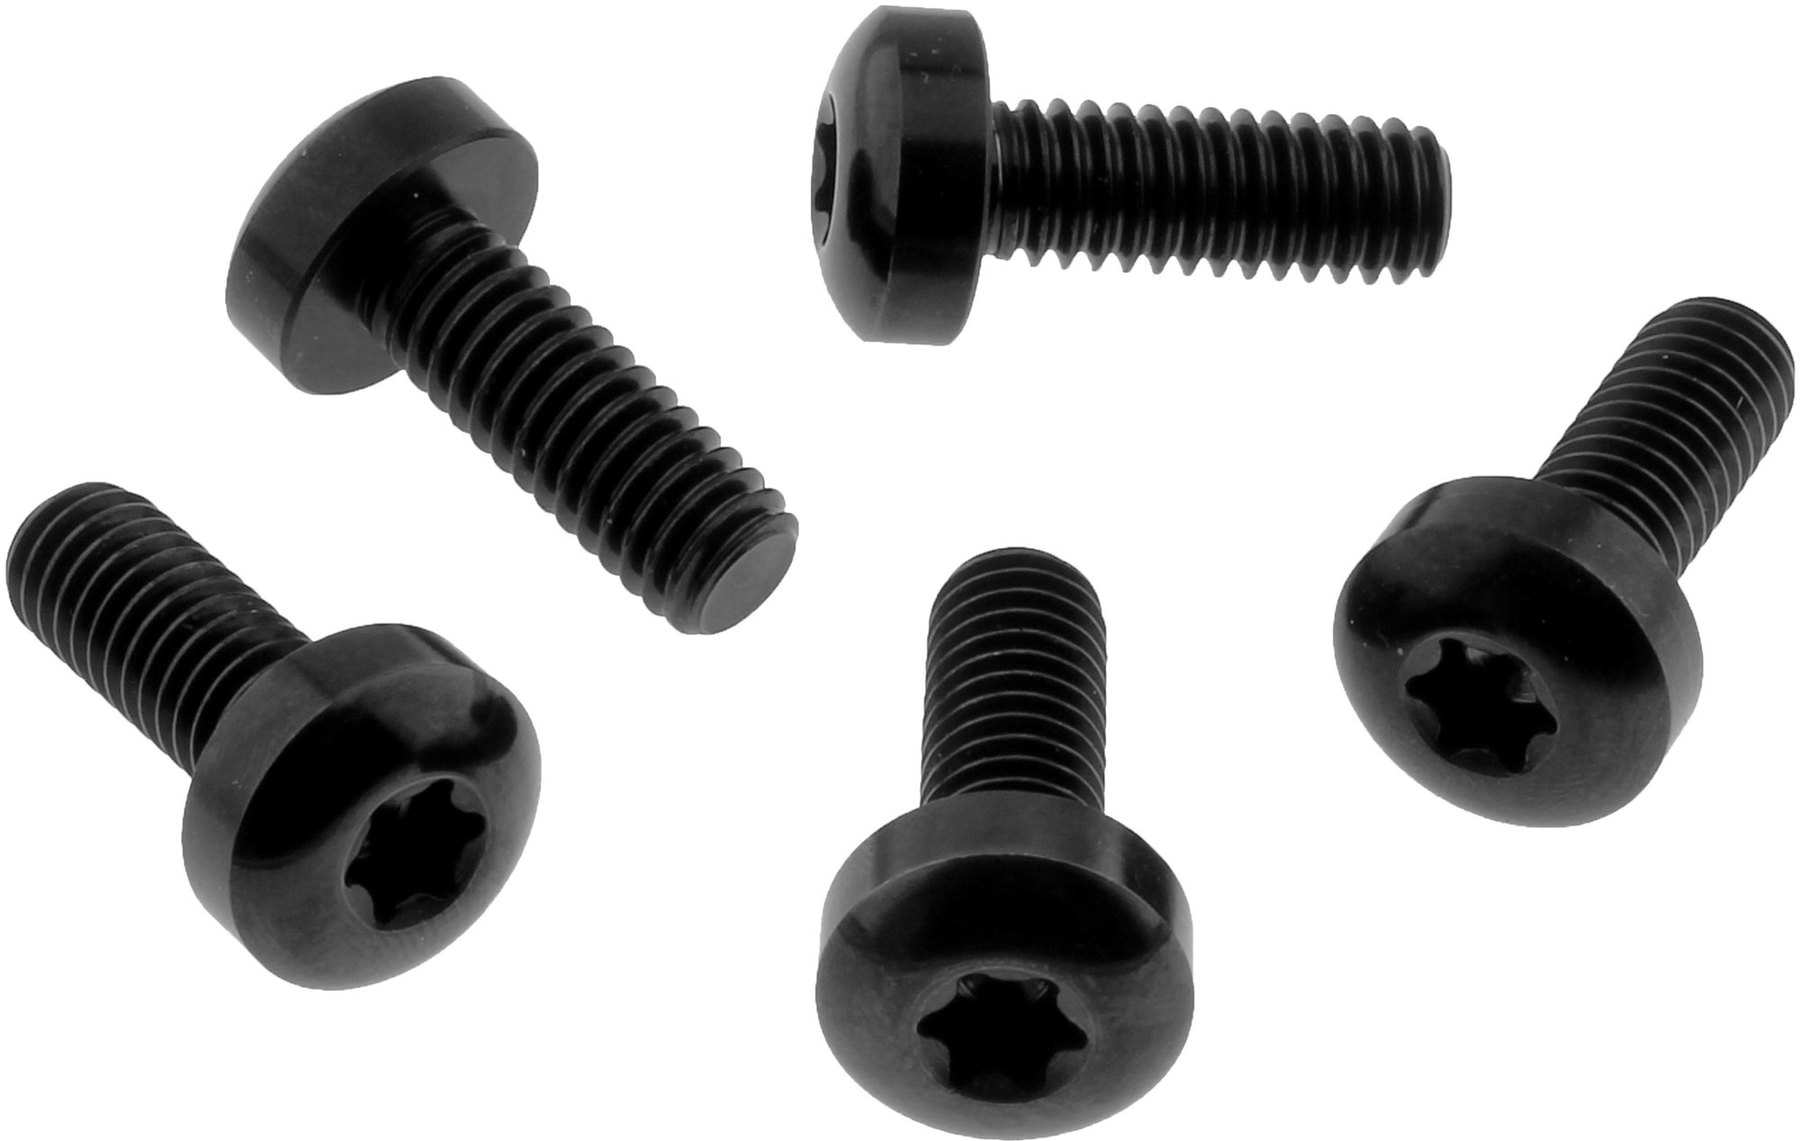 M6x15mm Titanium Hex Socket Bolts Screws for Motorcycle Brake Disc Fixed 